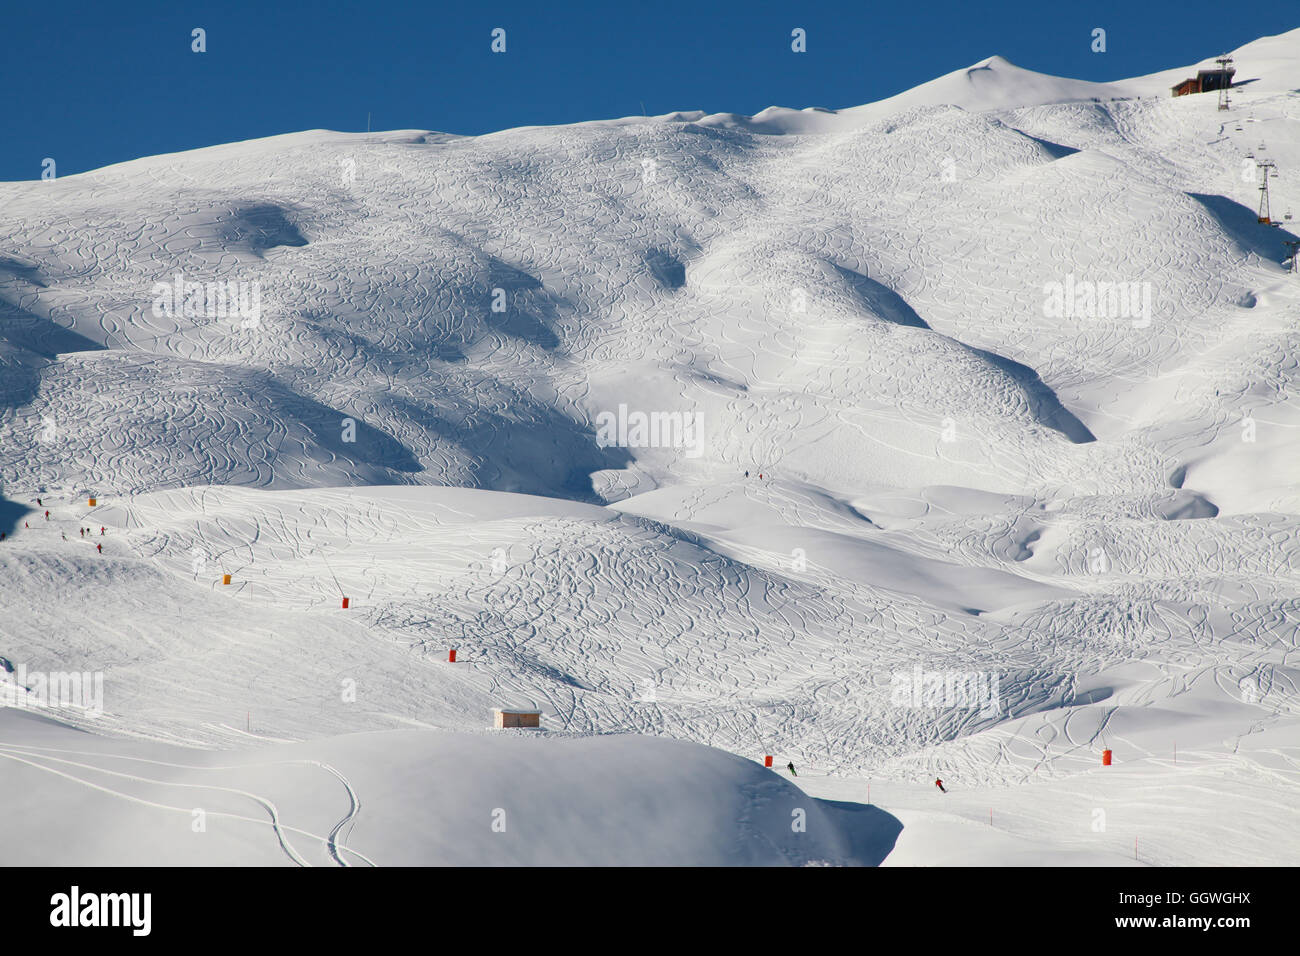 A criss cross of ski tracks gives these slopes a strange appearance Stock Photo